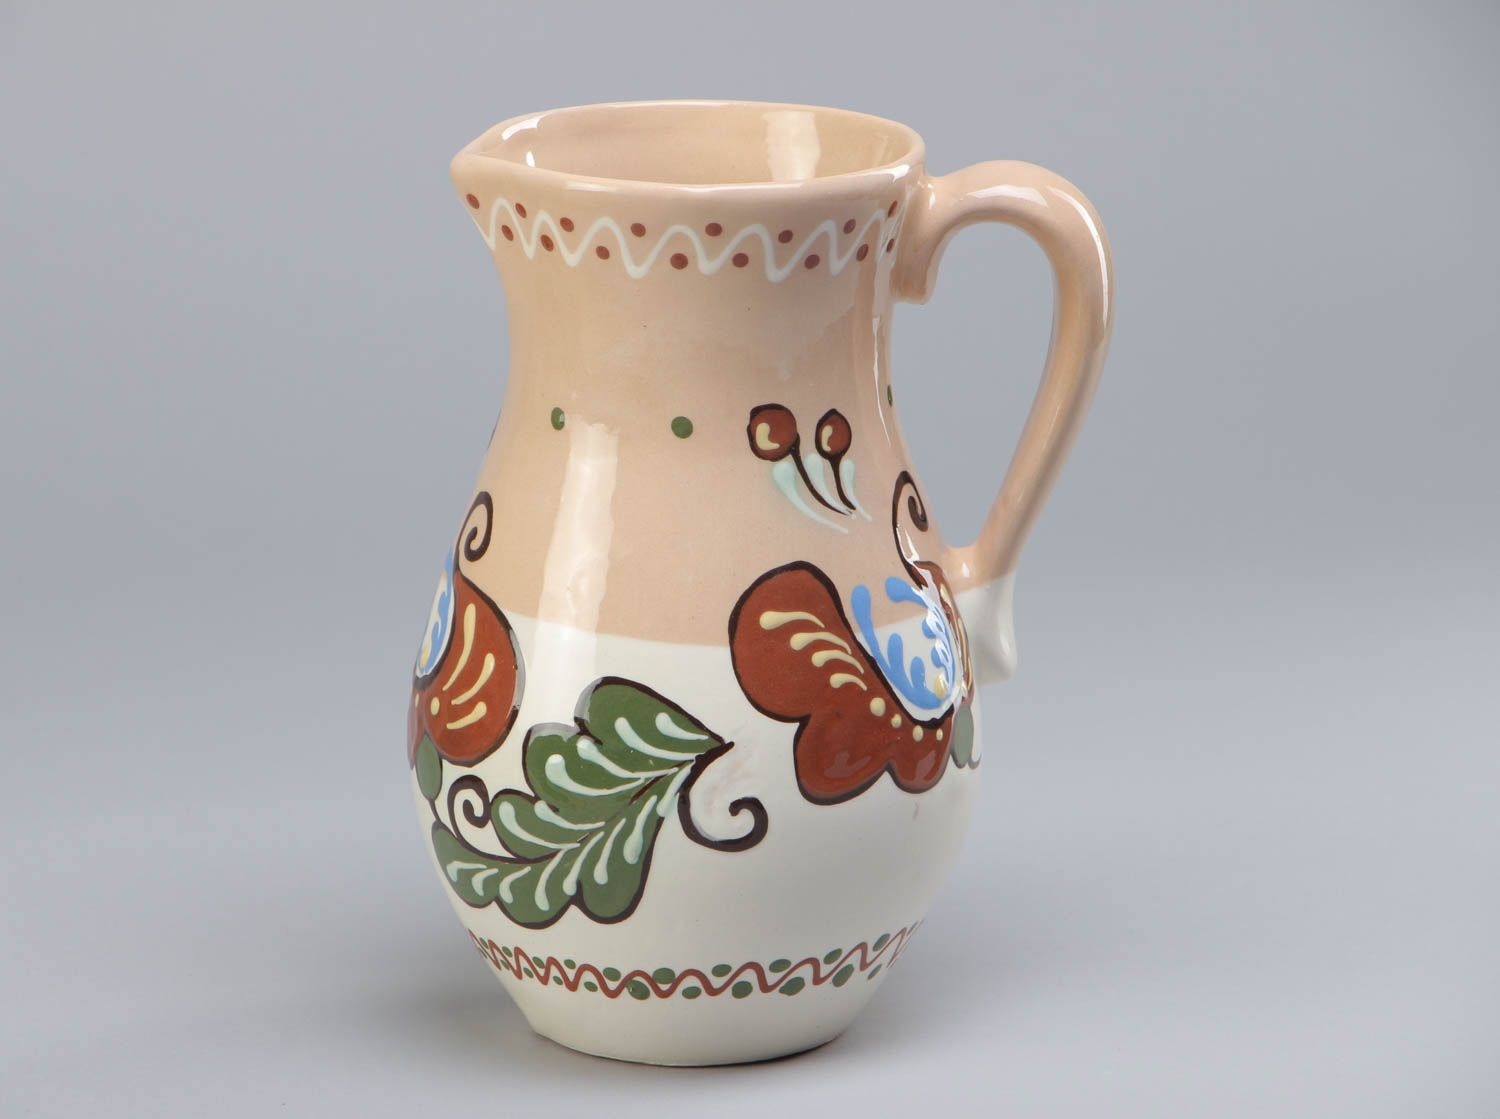 45 oz ceramic water jug porcelain with handle and floral design in village style 1,8 lb photo 2